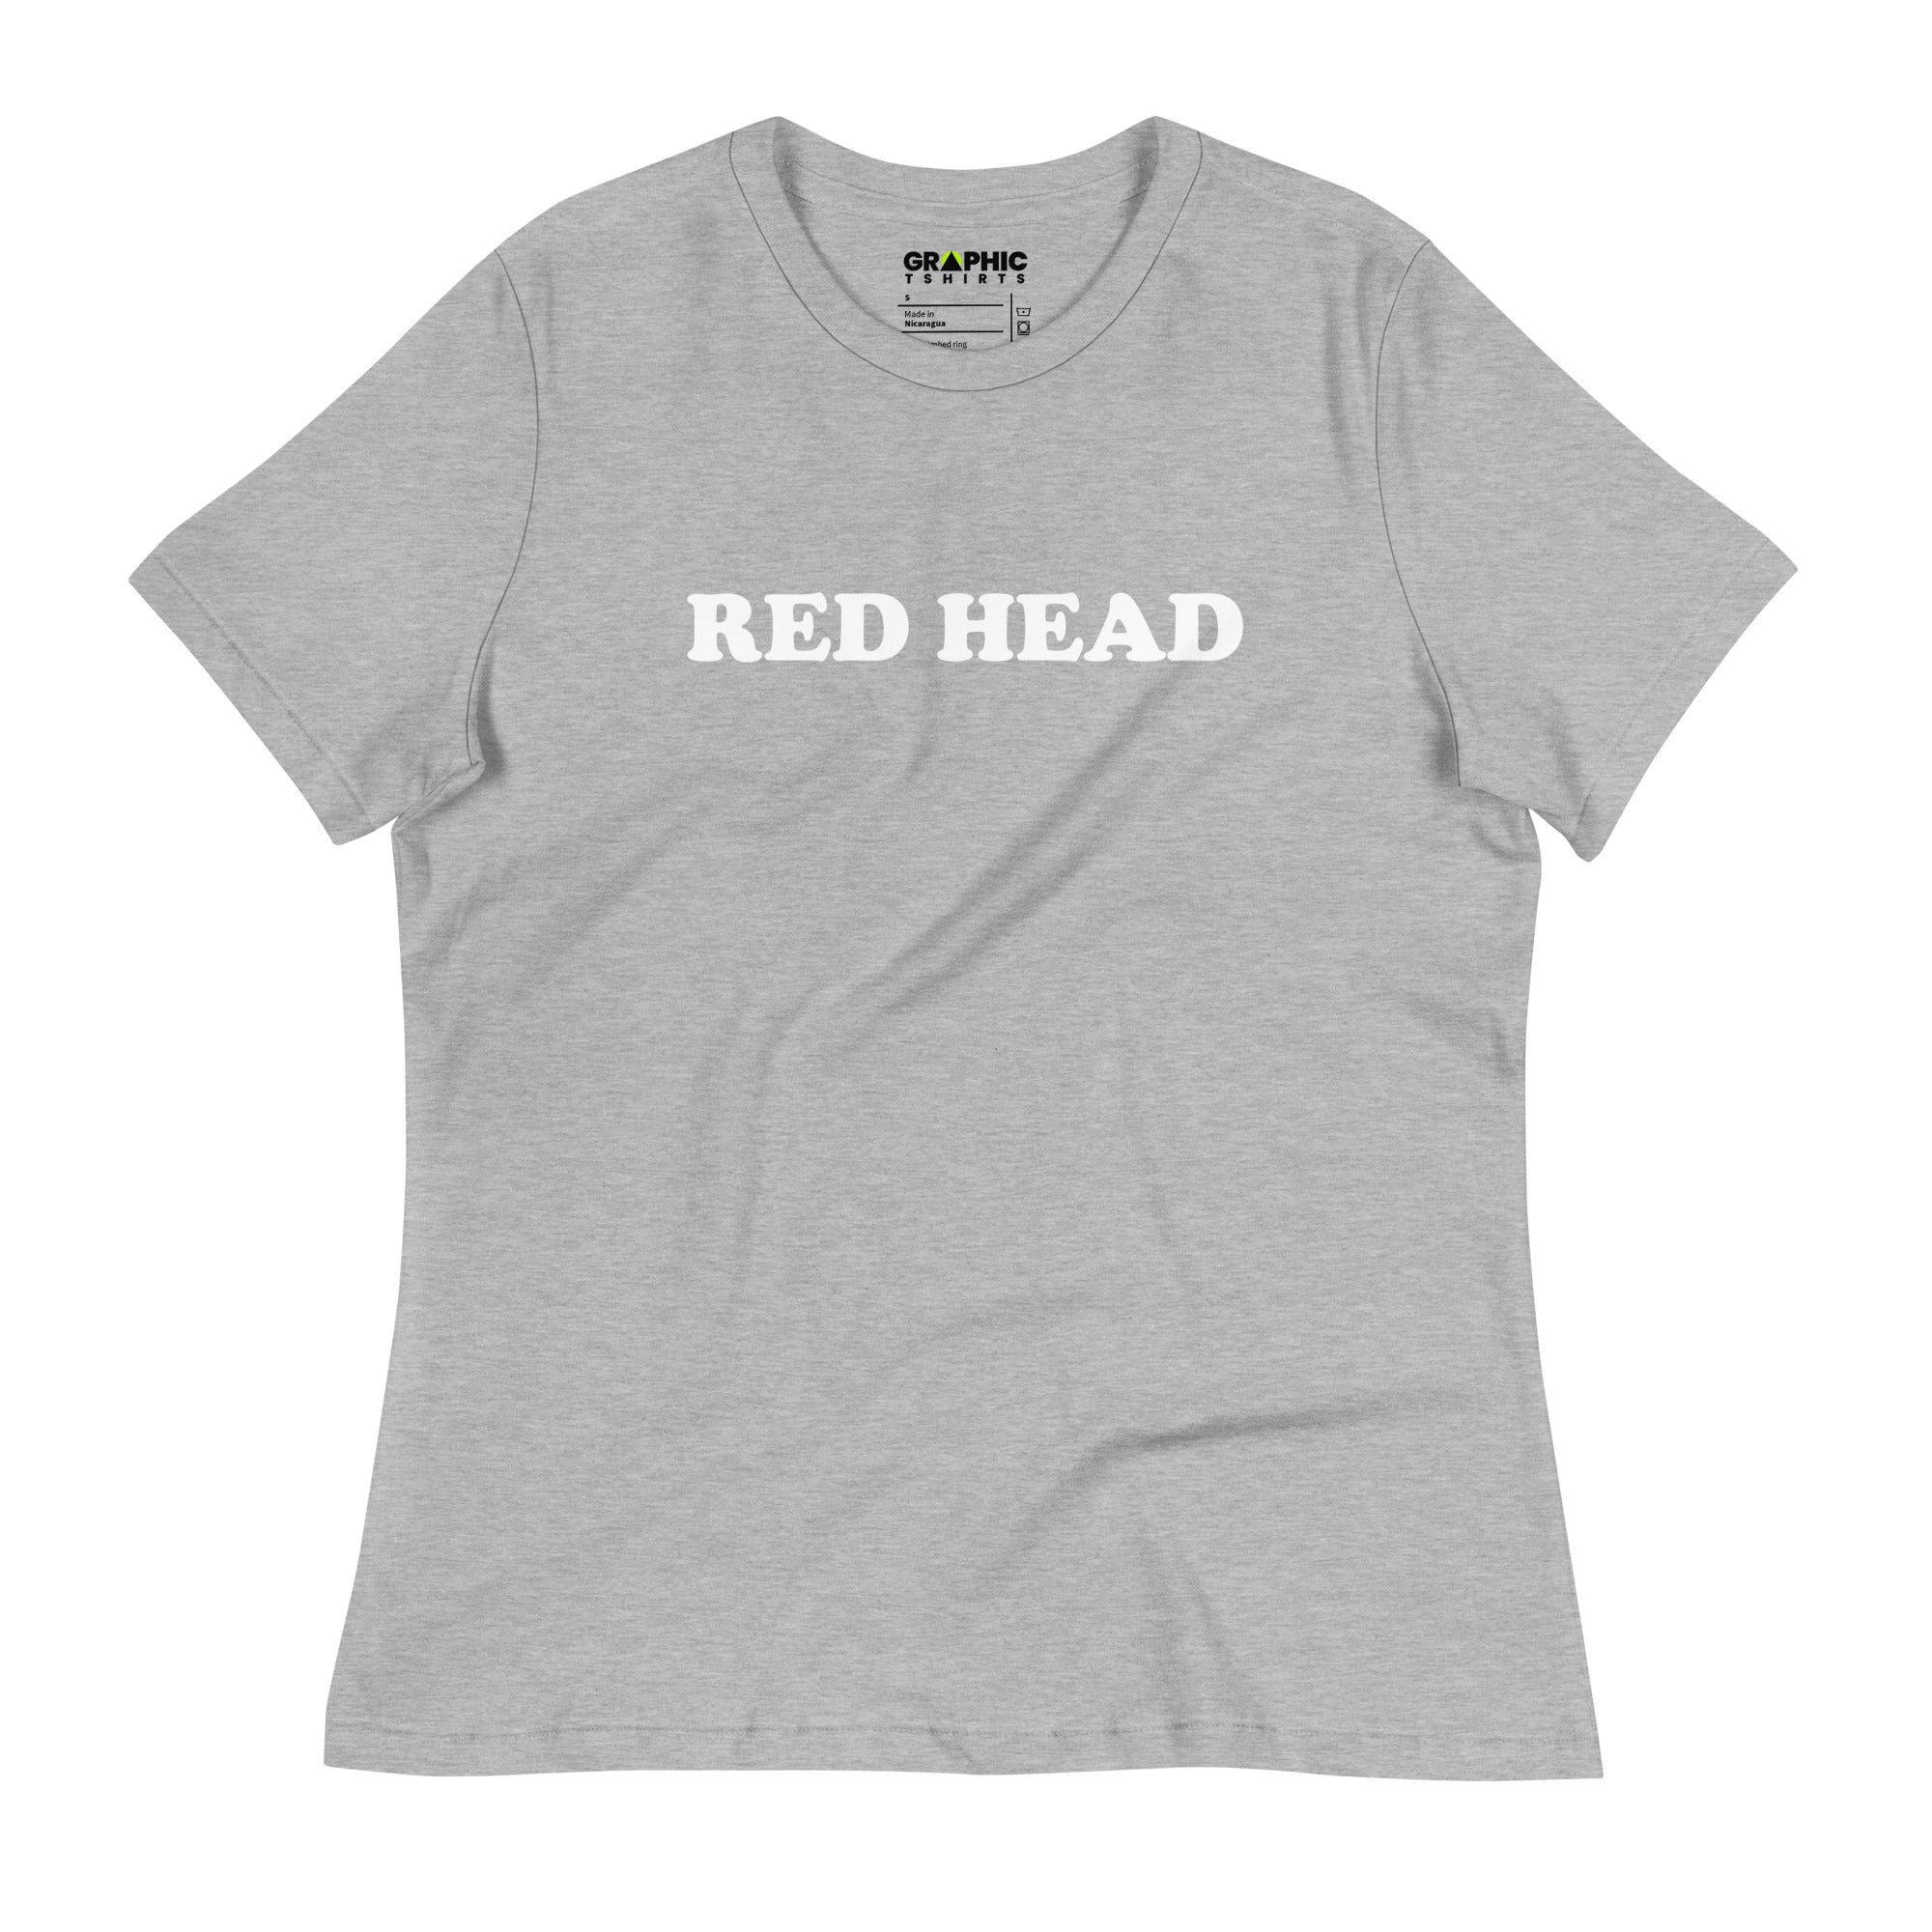 Women's Relaxed T-Shirt - Red Head - GRAPHIC T-SHIRTS